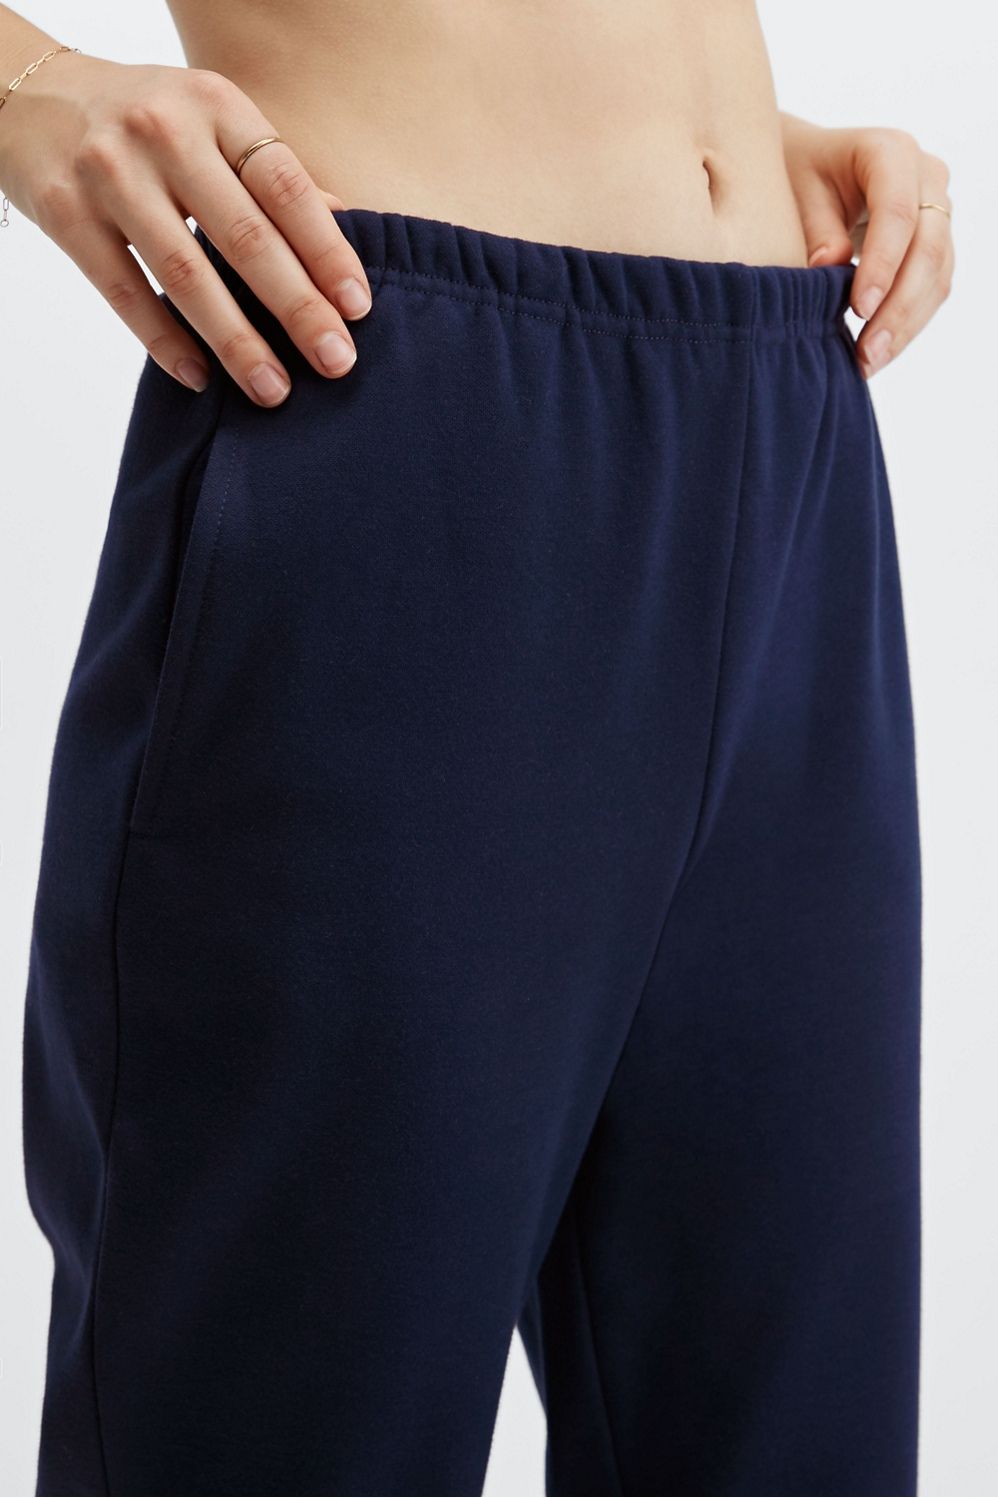 Go-To High-Waisted Slim Sweatpant | Fabletics - North America